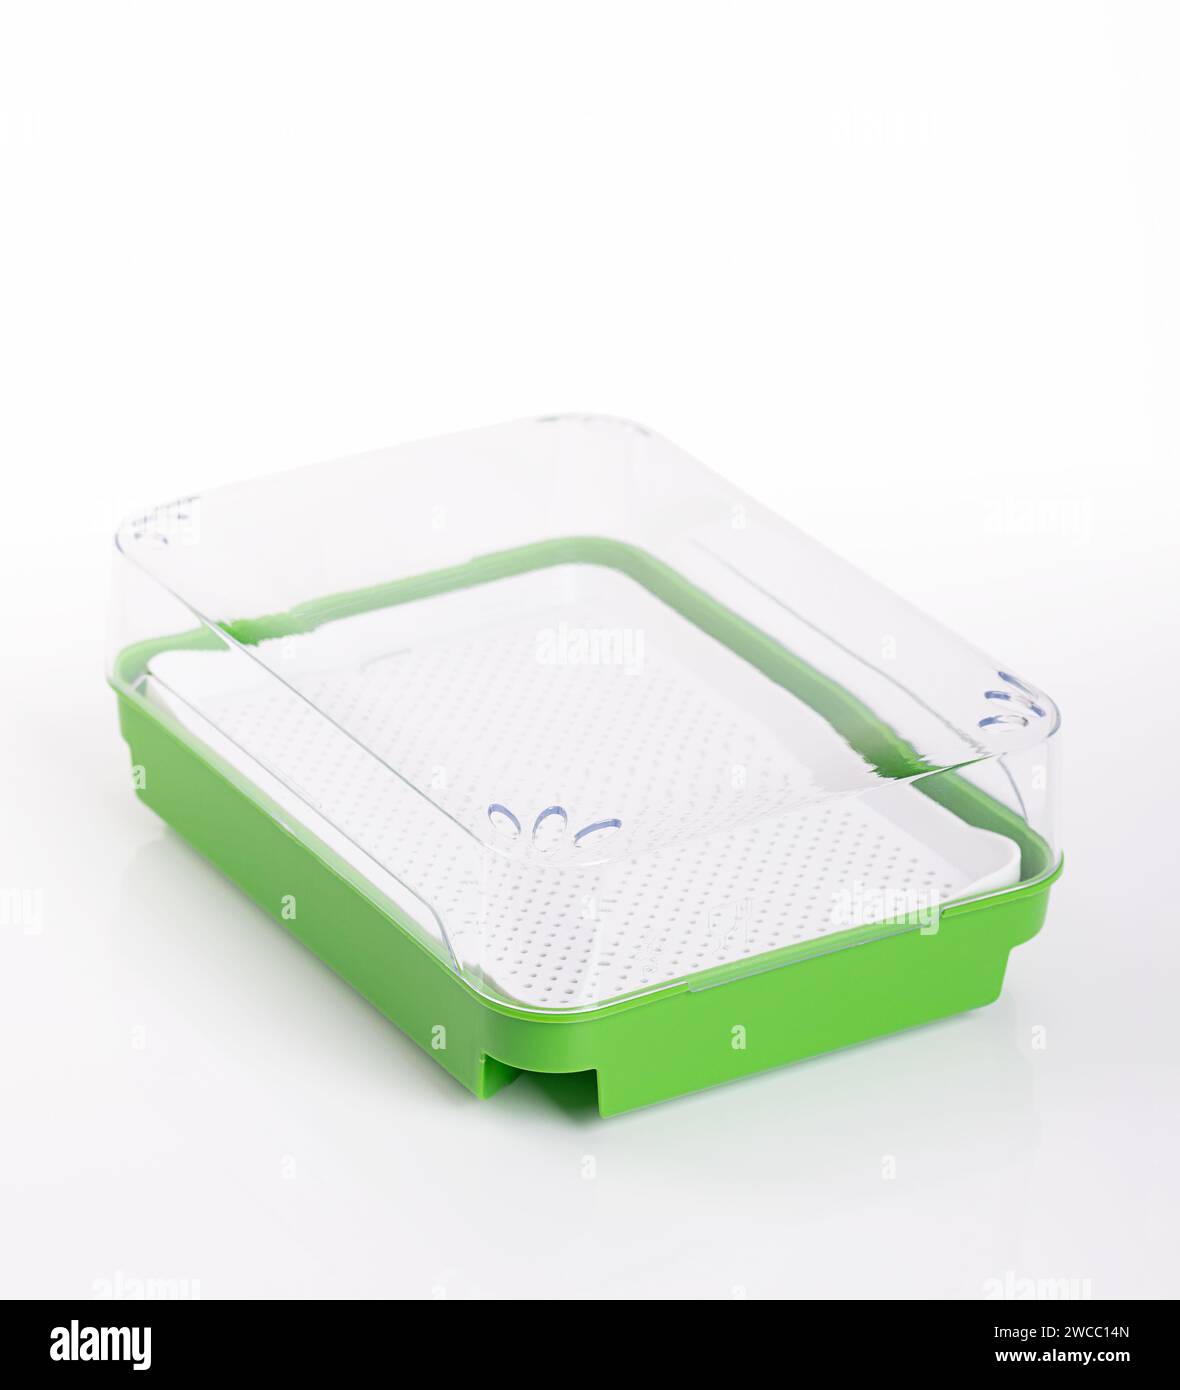 Cress growing kit. Green germination tray with white sieve insert and transparent cover. Sprouting set for sprouting seeds, and for growing shoots. Stock Photo